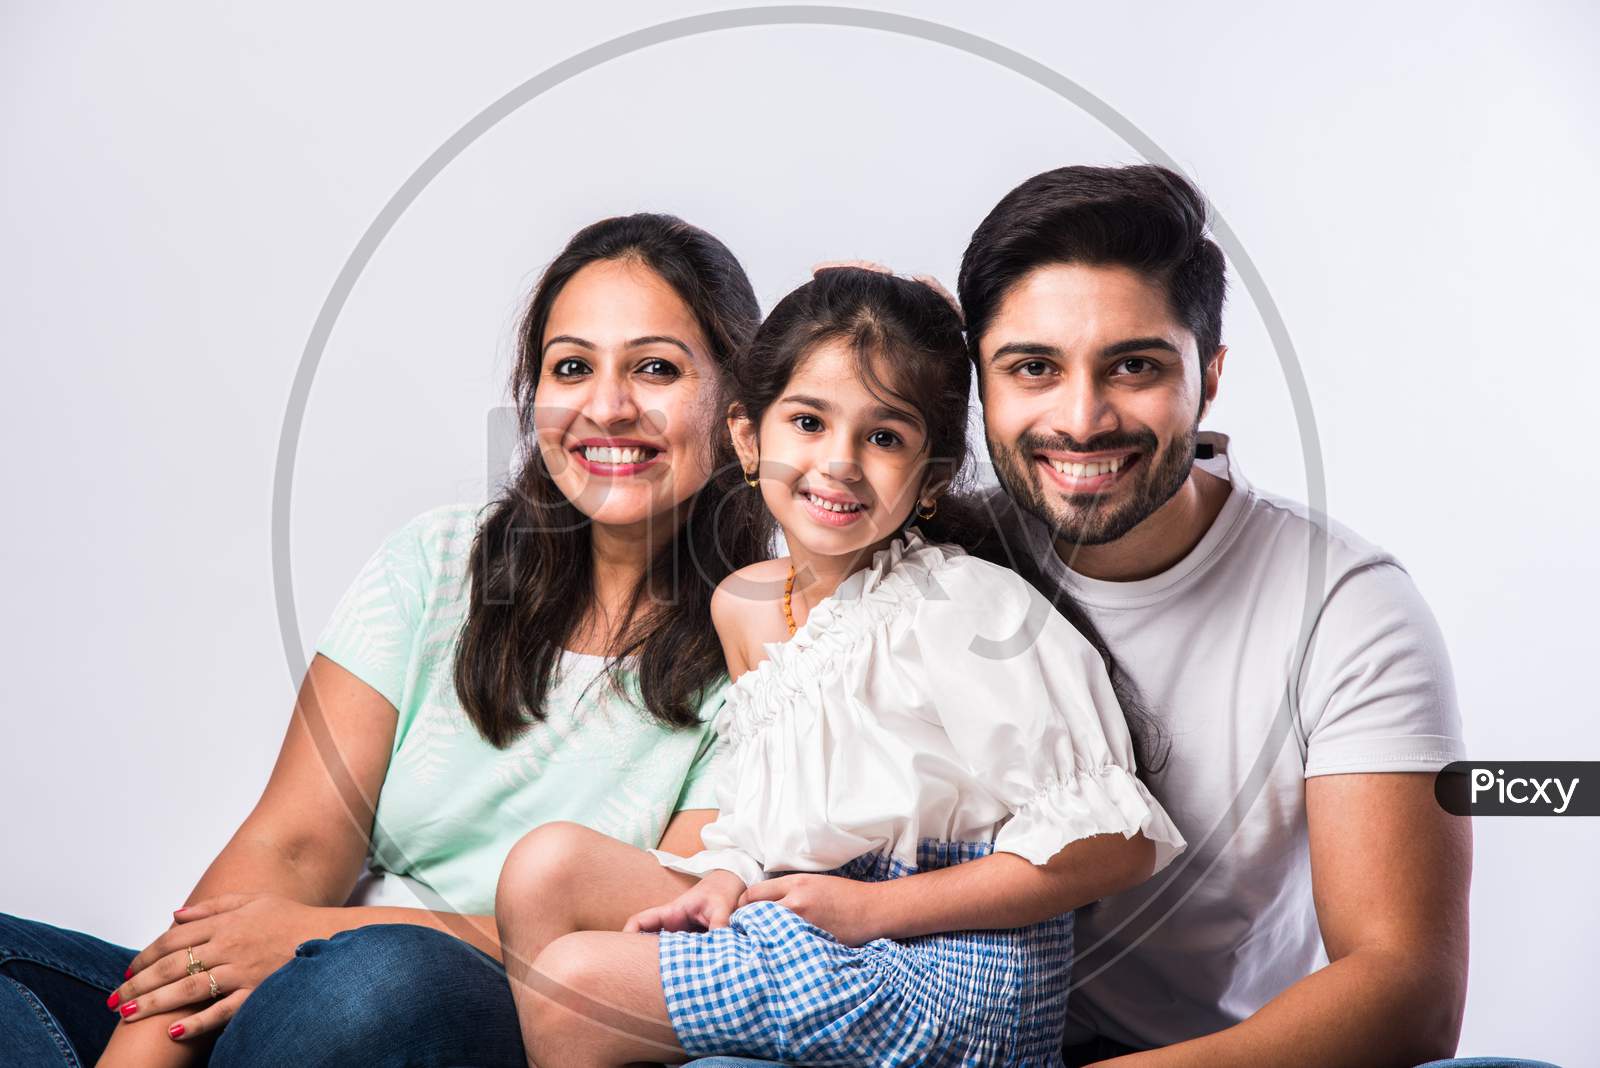 Portrait Of Young Indian Family Of Four Looking At Camera On White Background